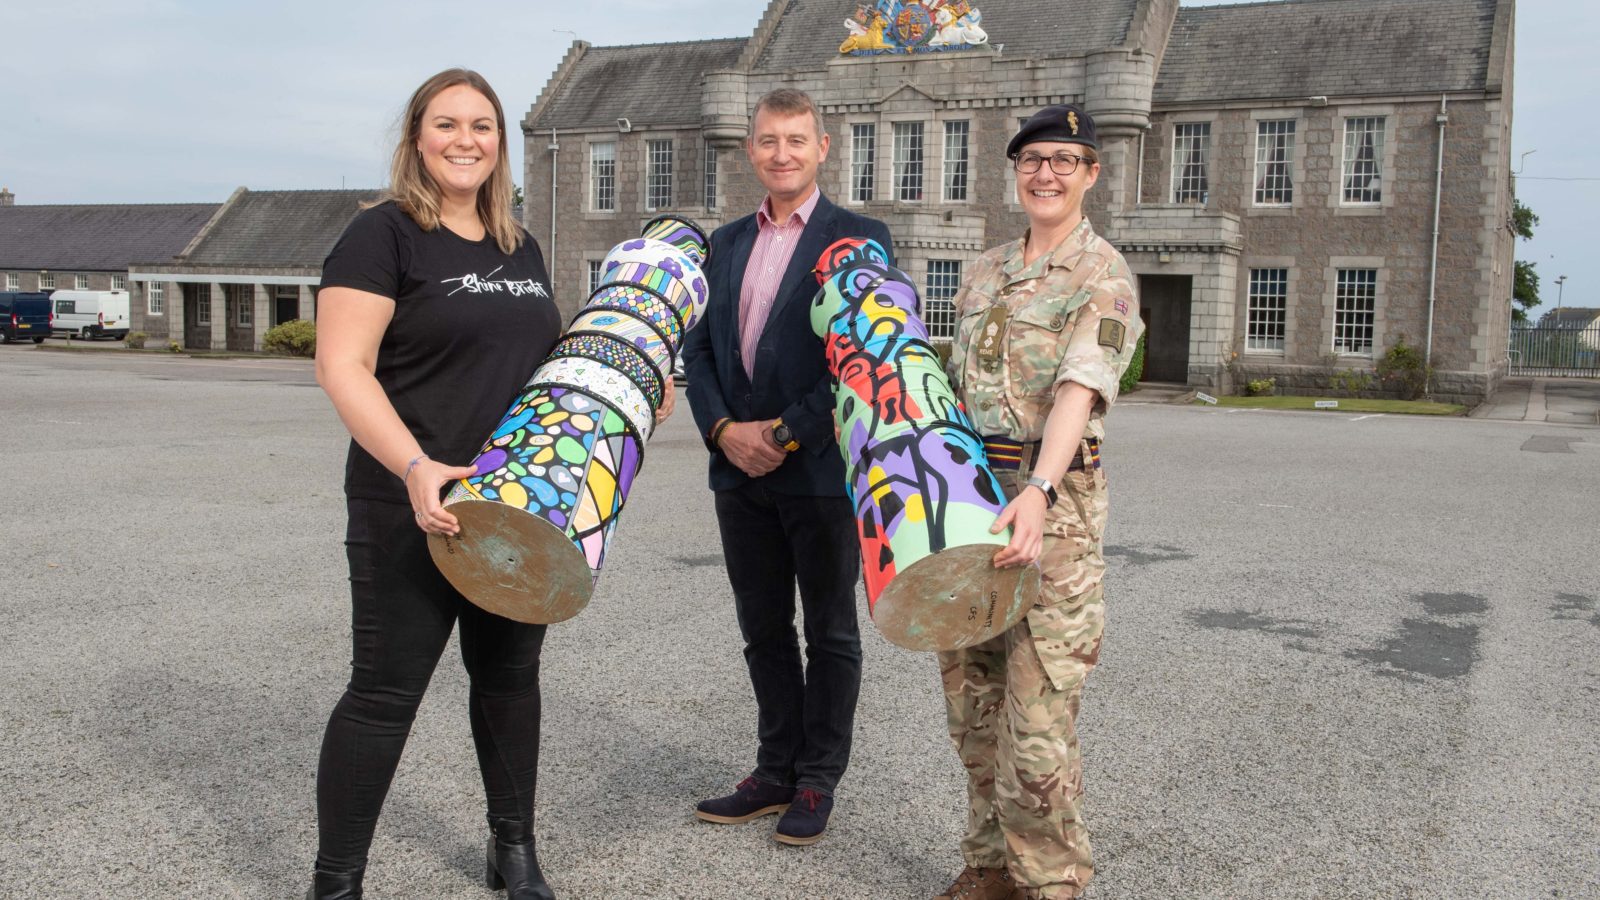 North-east given the opportunity to bid a fond farewell to the ‘Light the North’ lighthouse trail at the Gordon Barracks